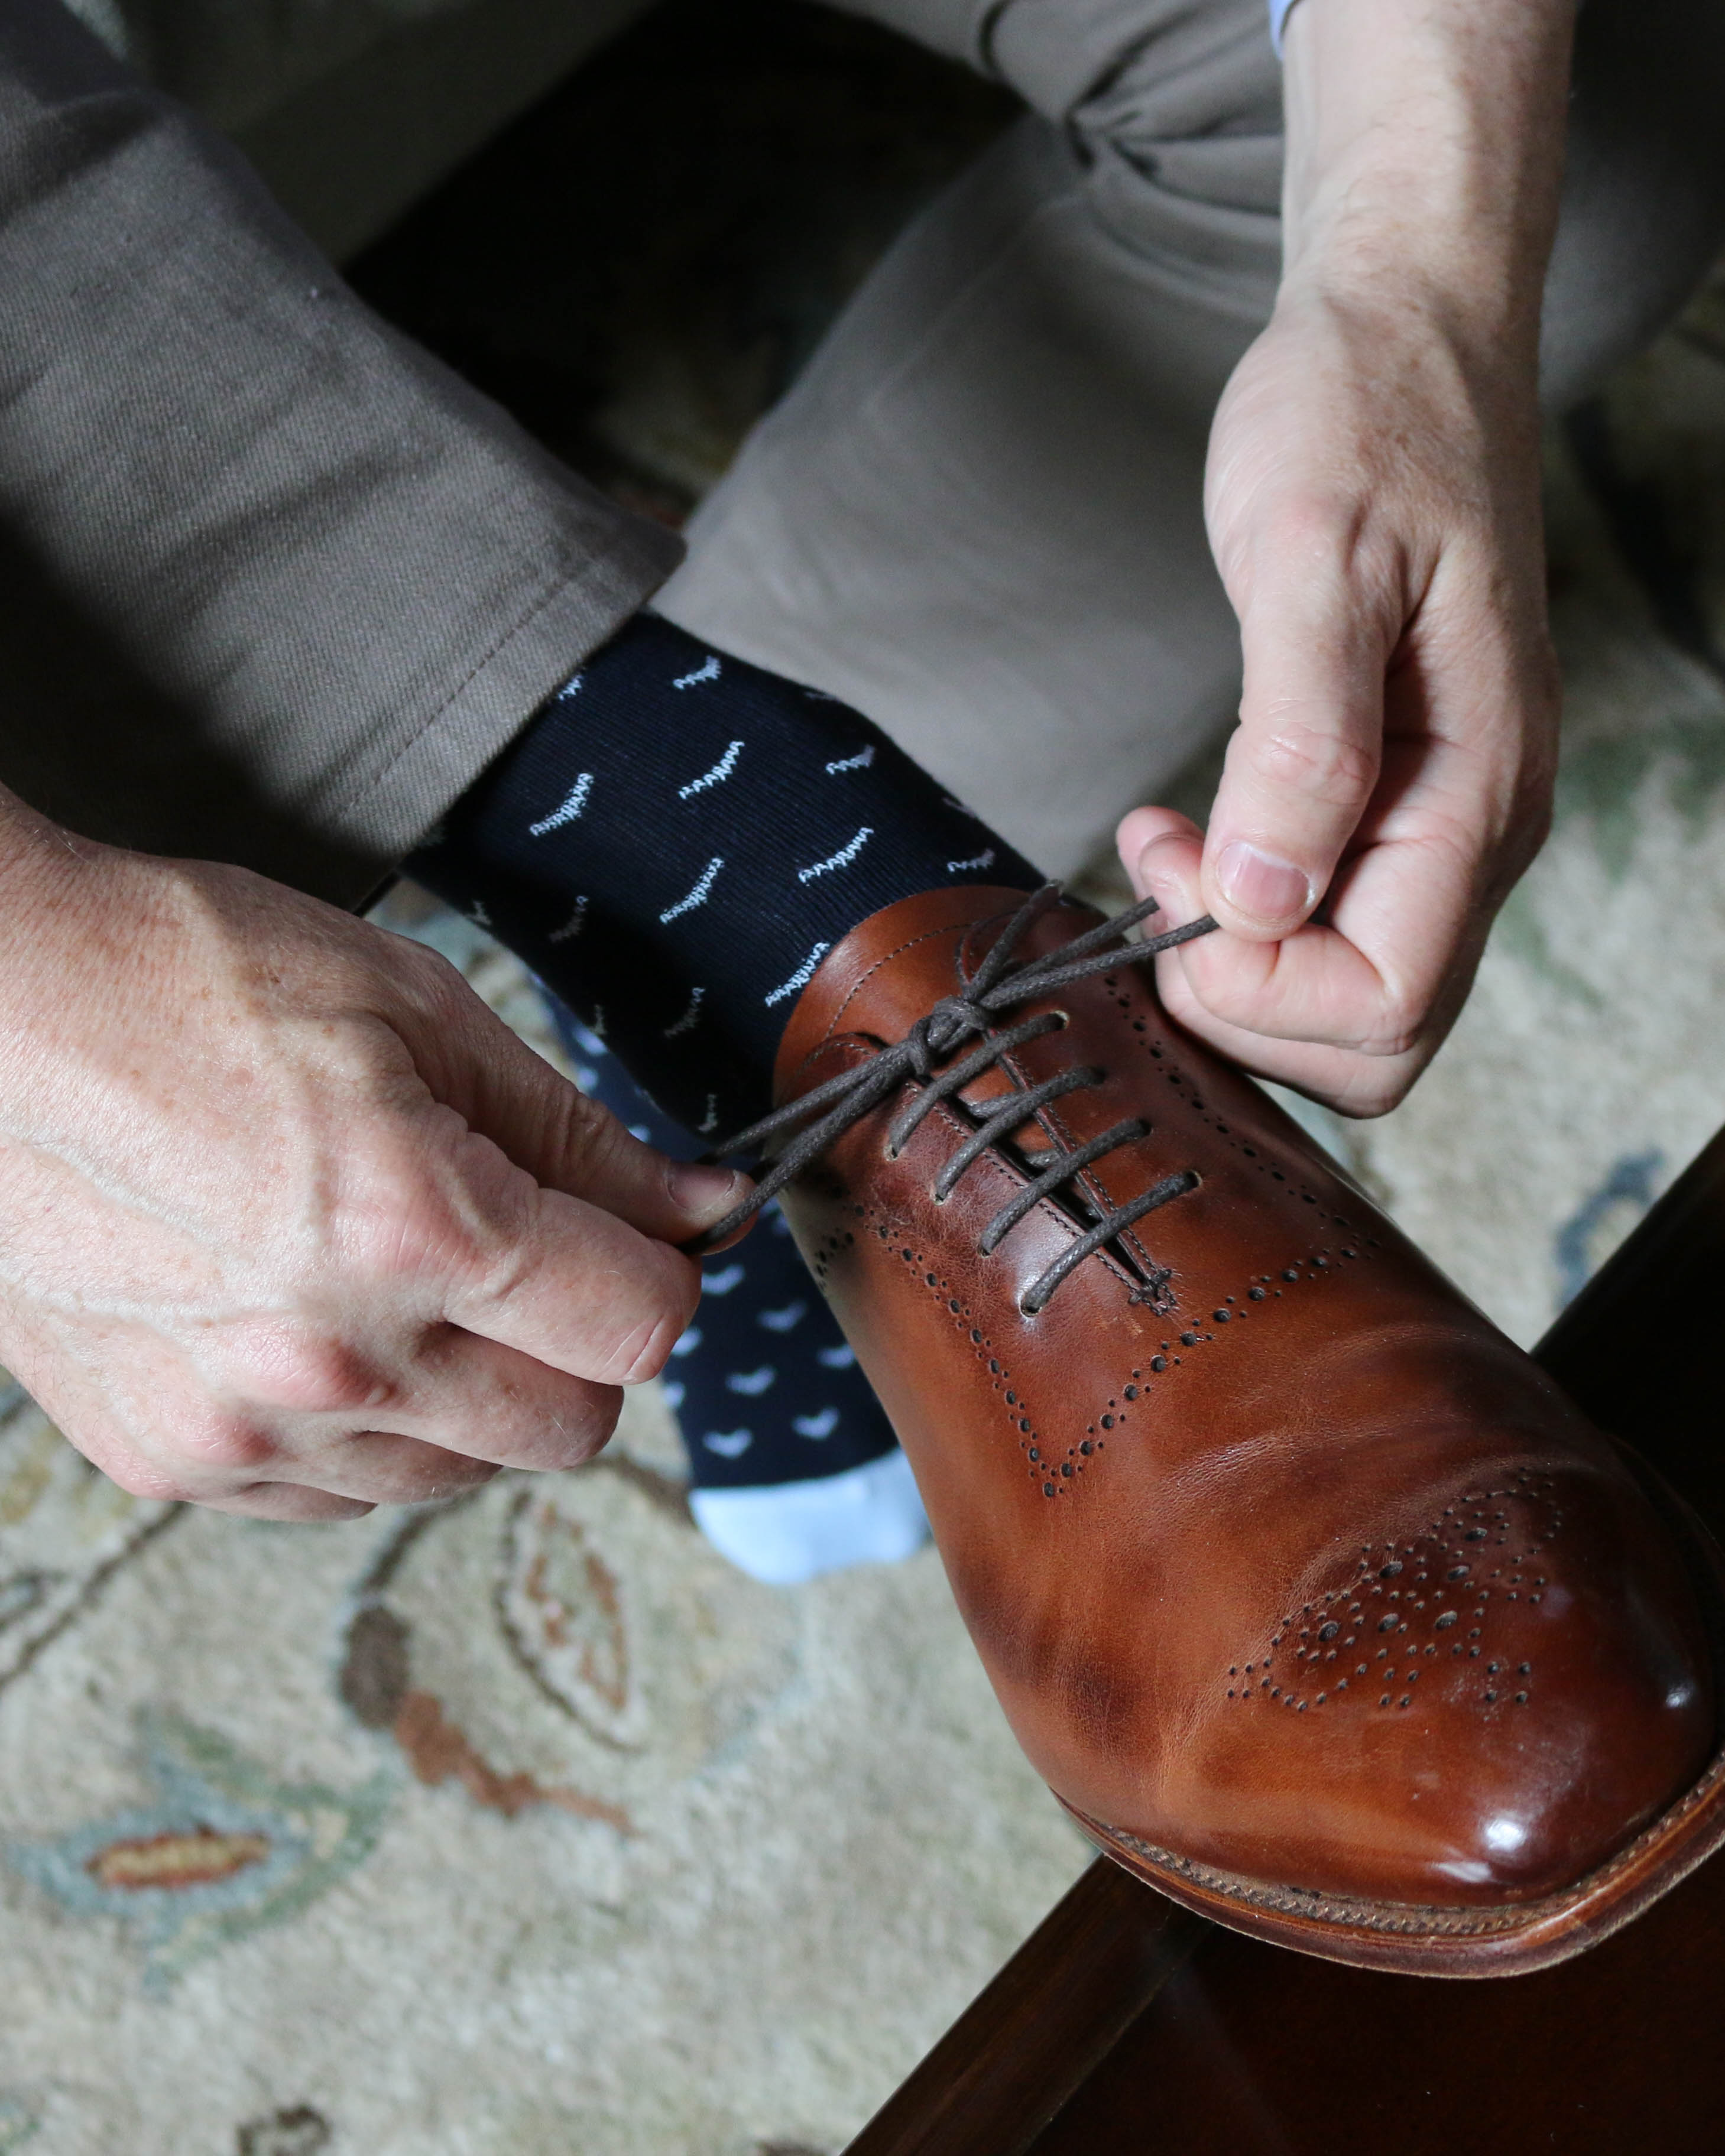 navy blue over the calf dress socks with light blue print, brown dress shoes with grey laces, grey casual pants